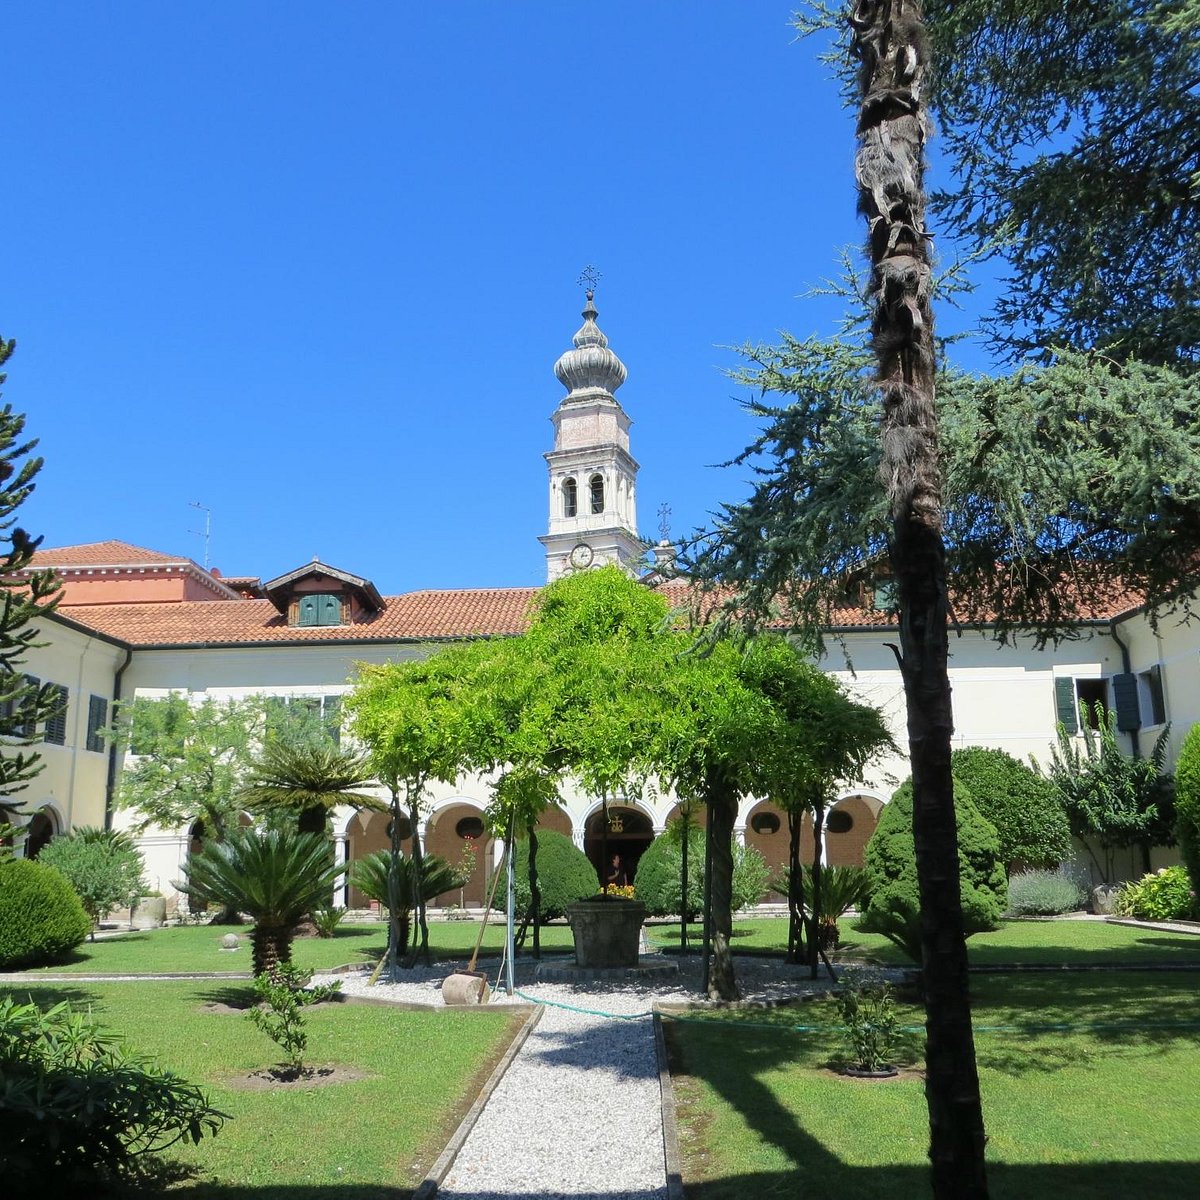 A Visit to San Lazzaro: An Armenian Island in the Heart of Europe (Part III)